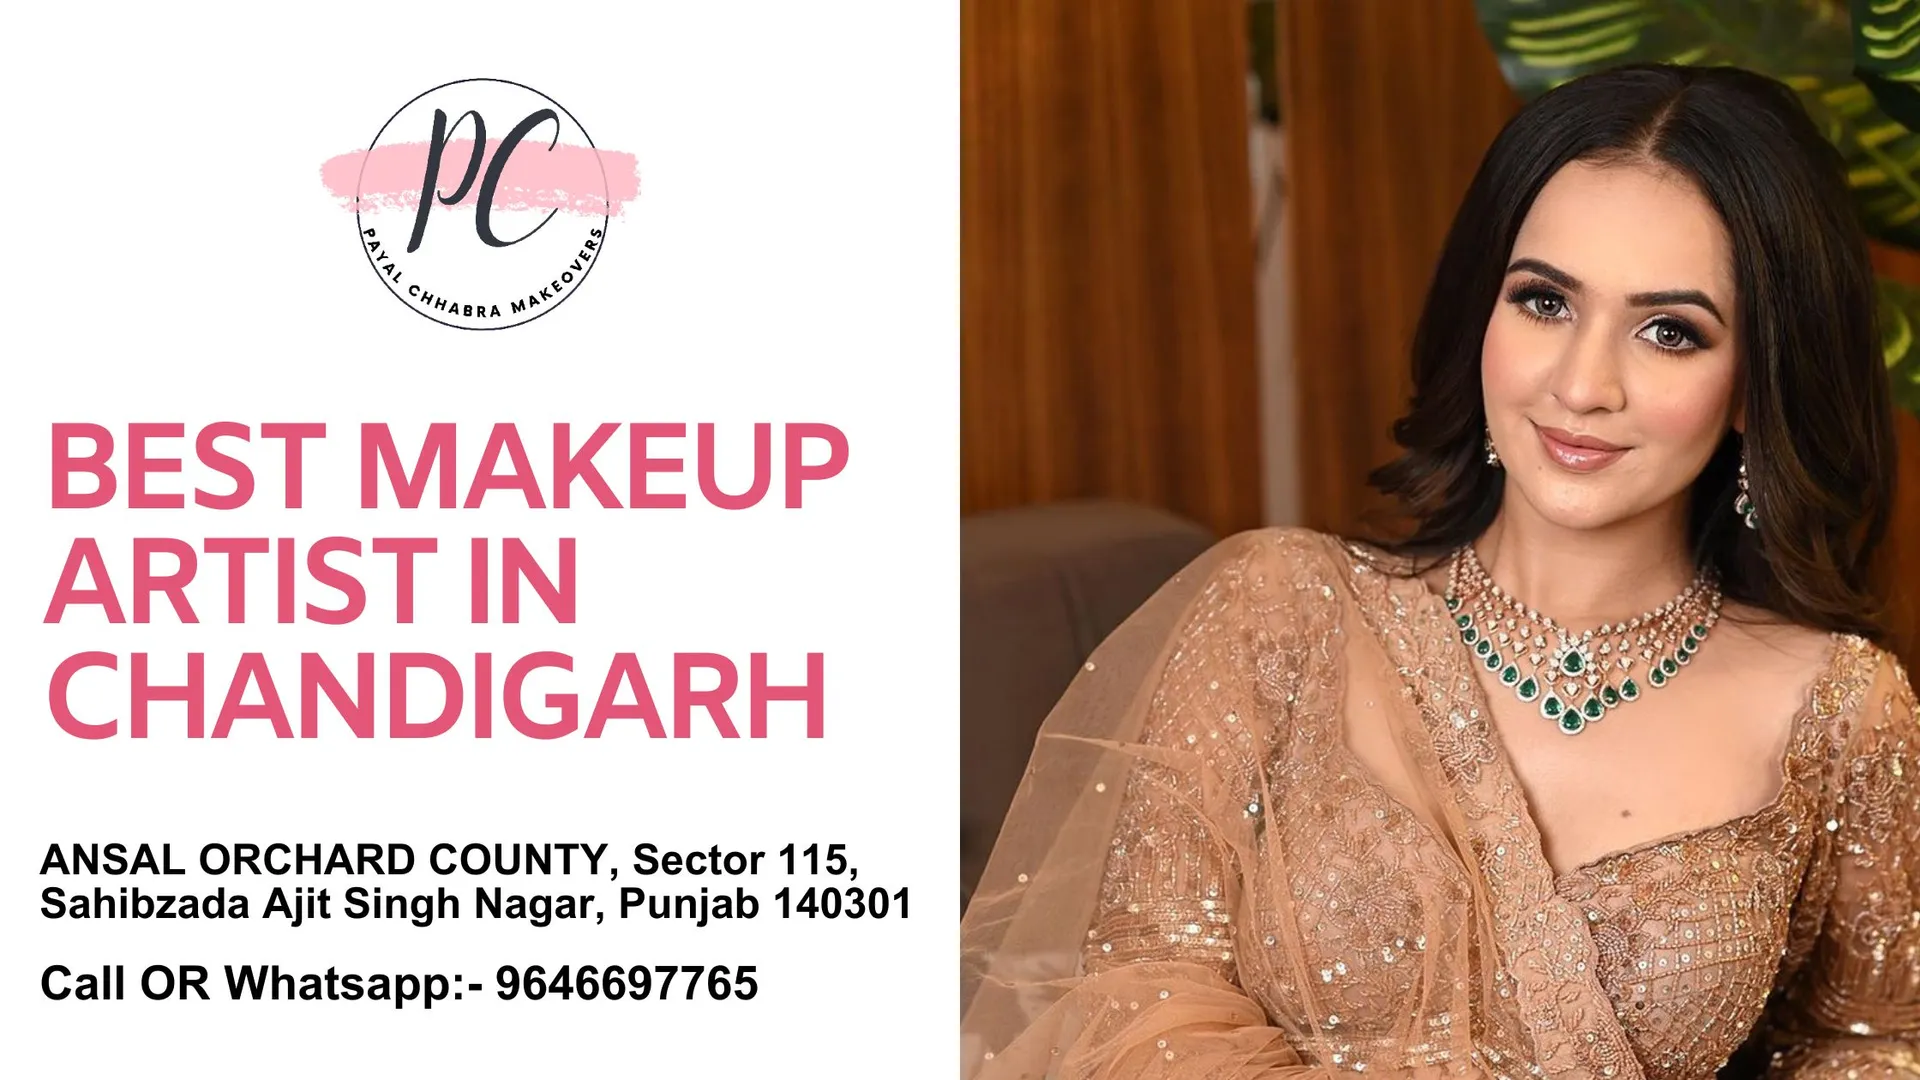 Step into the World of Beauty and Elegance with Payal Chhabra Makeovers - The Best Makeup Artist in Chandigarh

Discover the magic of flawless beauty with Payal Chhabra, renowned as the best makeup artist in Chandigarh. With an artistic flair and a deep passion for her craft, Payal creates stunning makeovers that accentuate your features and bring out your inner radiance.

From glamorous red carpet looks to subtle and sophisticated makeups, Payal's expertise knows no bounds. She understands the importance of personalization, working closely with you to create a look that complements your style and enhances your natural beauty.

Using premium-quality products and innovative techniques, Payal ensures a flawless and long-lasting makeup that withstands any occasion. Her warm and friendly demeanor makes the entire experience enjoyable and relaxing, leaving you feeling pampered and confident.

For a transformative beauty experience, choose Payal Chhabra Makeovers, the best makeup artist in Chandigarh. Book your appointment now and embrace the allure of professional makeup artistry at its finest. https://g.co/kgs/7eMr4B

Payal Chhabra Makeovers
Contact Person Name:- Payal Chhabra
Phone no. 9646697765
Address:- ANSAL ORCHARD COUNTY, Sector 115, Sahibzada Ajit Singh Nagar, Punjab 140301
Website:- https://bit.ly/43LmPeW
Email:- payalchhabramakeovers@gmail.com